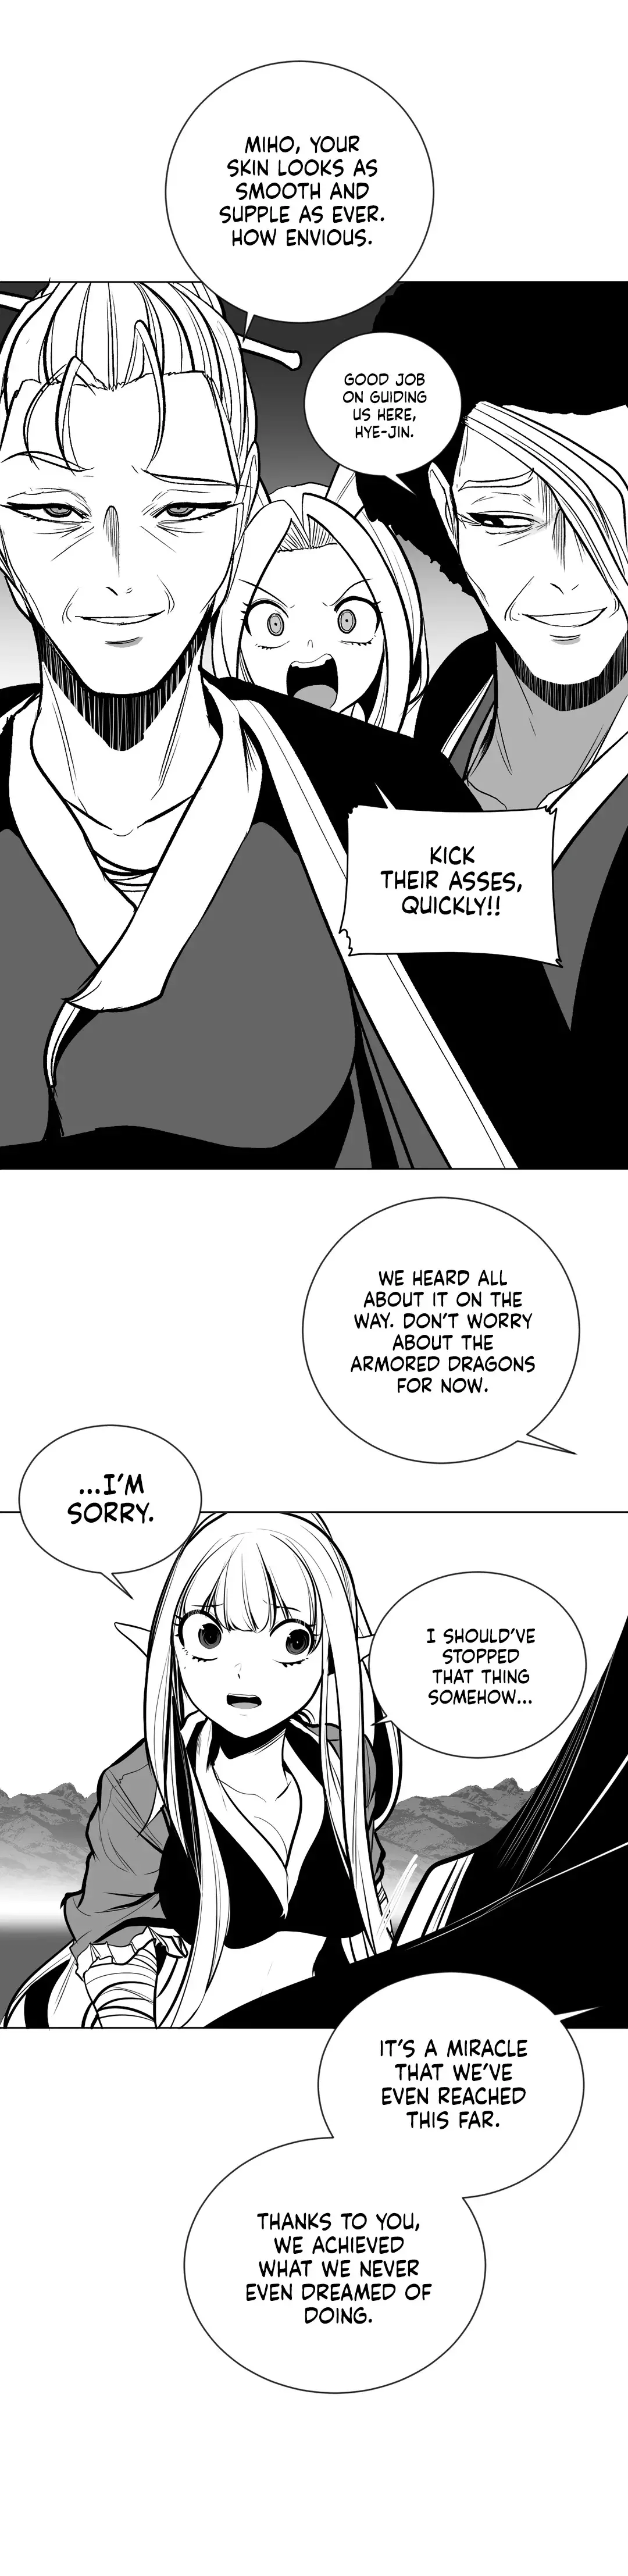 What Happens Inside The Dungeon - 86 page 27-8477c5ec